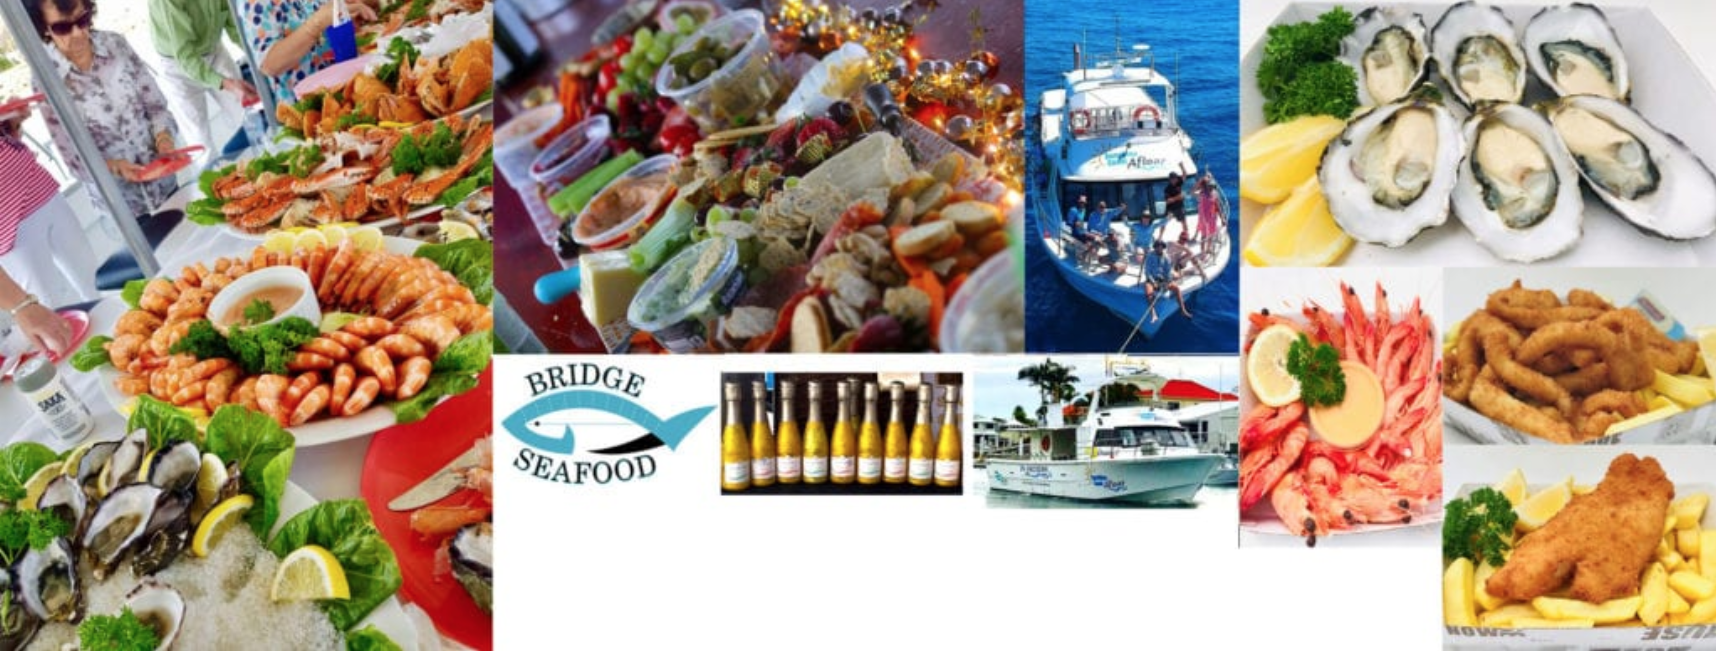 Seafood Lunch and Twilight Cruise